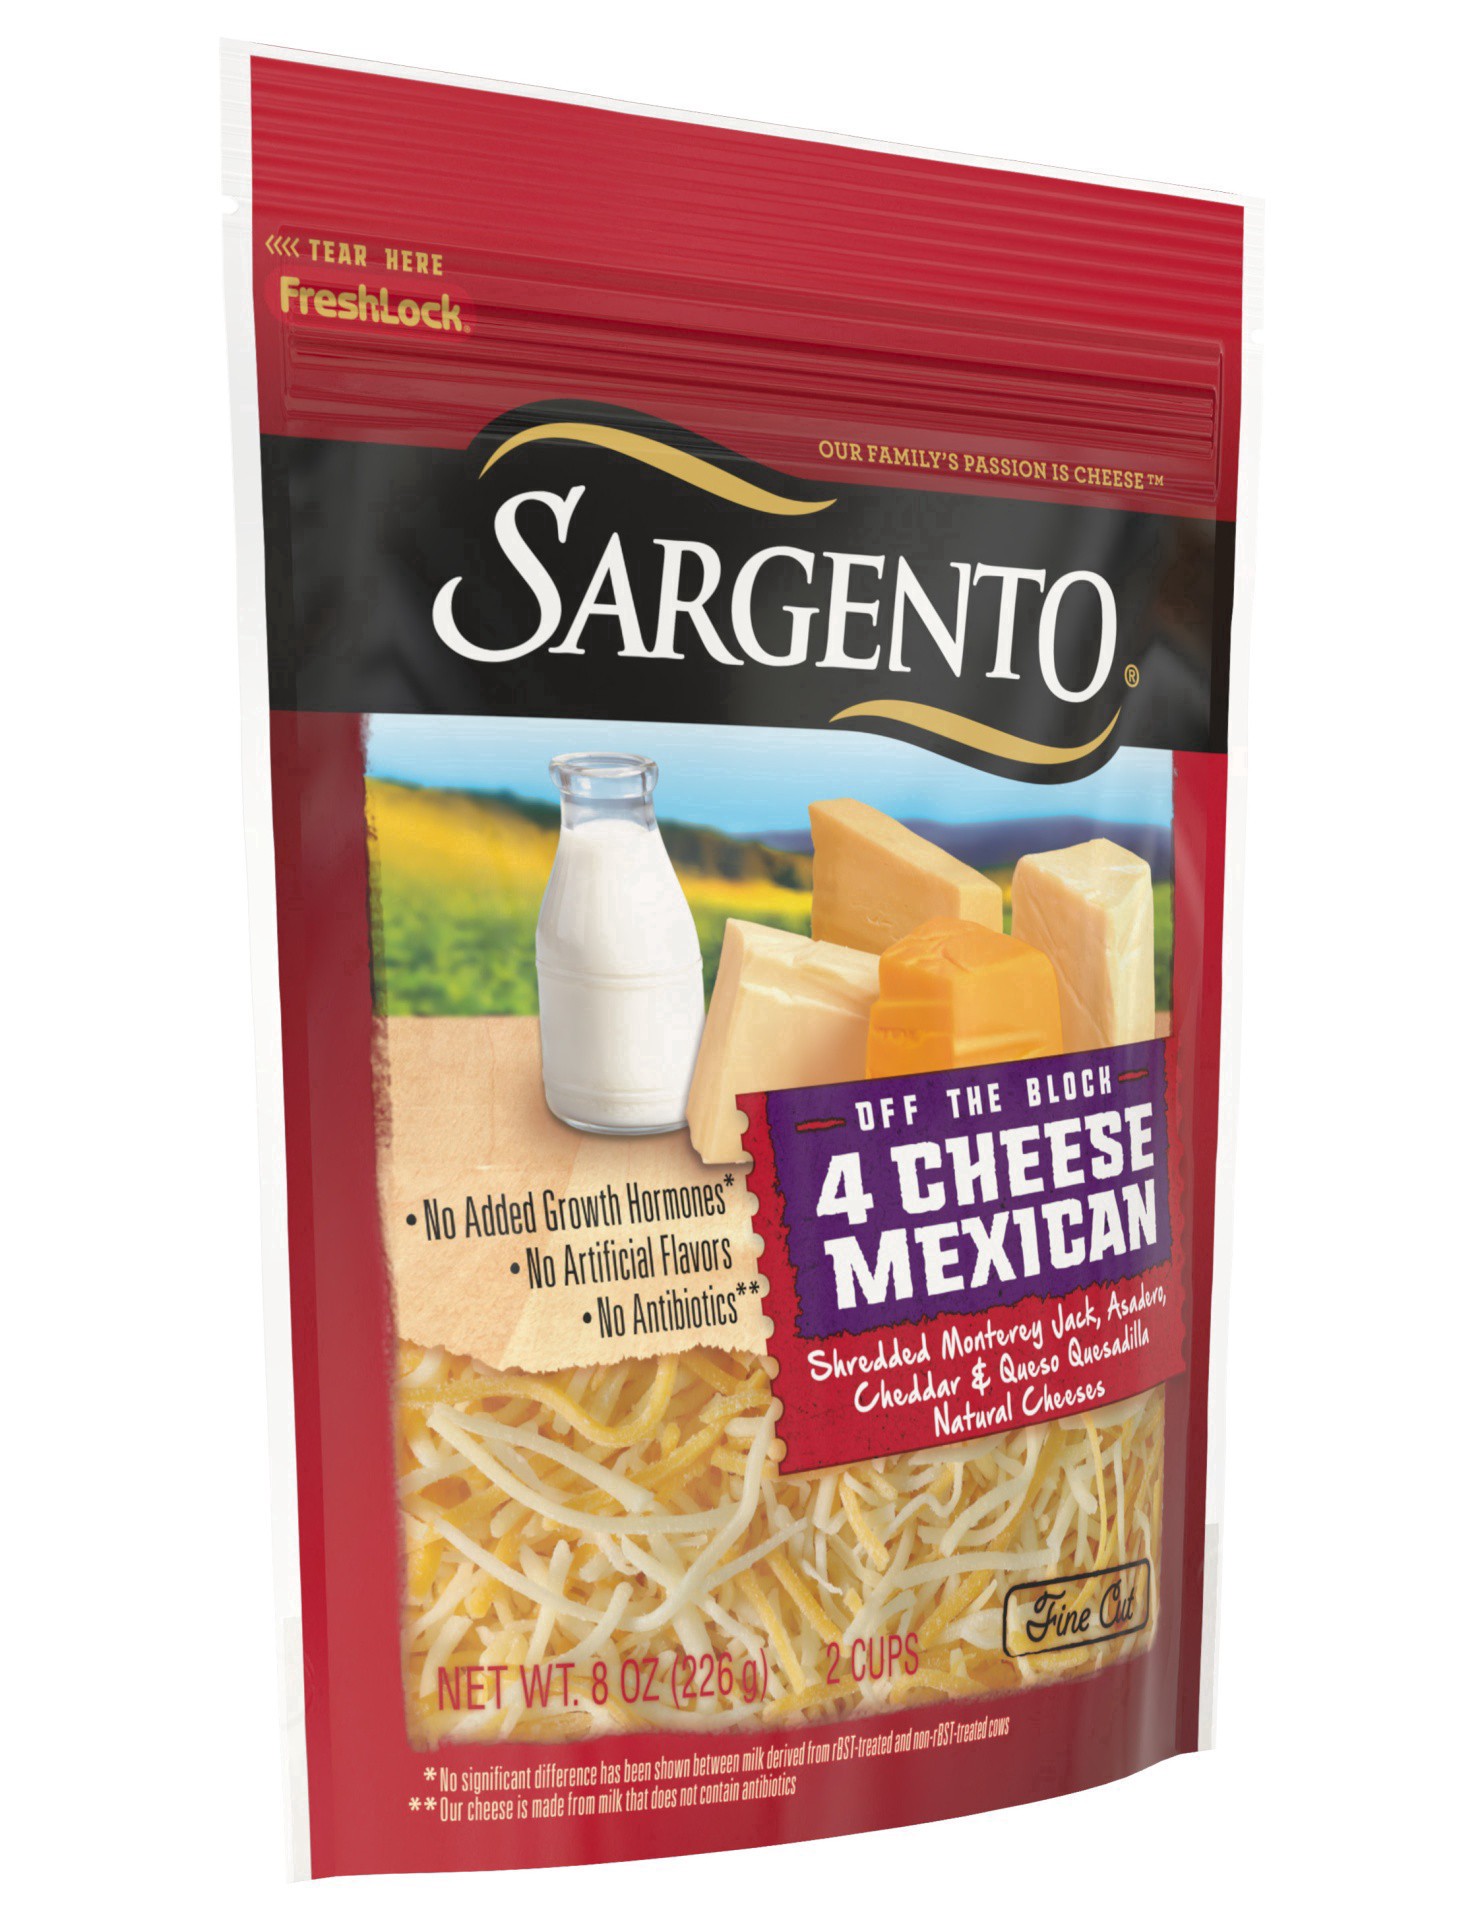 slide 12 of 23, Sargento Shredded 4 Cheese Mexican Natural Cheese, Fine Cut, 8 oz., 8 oz